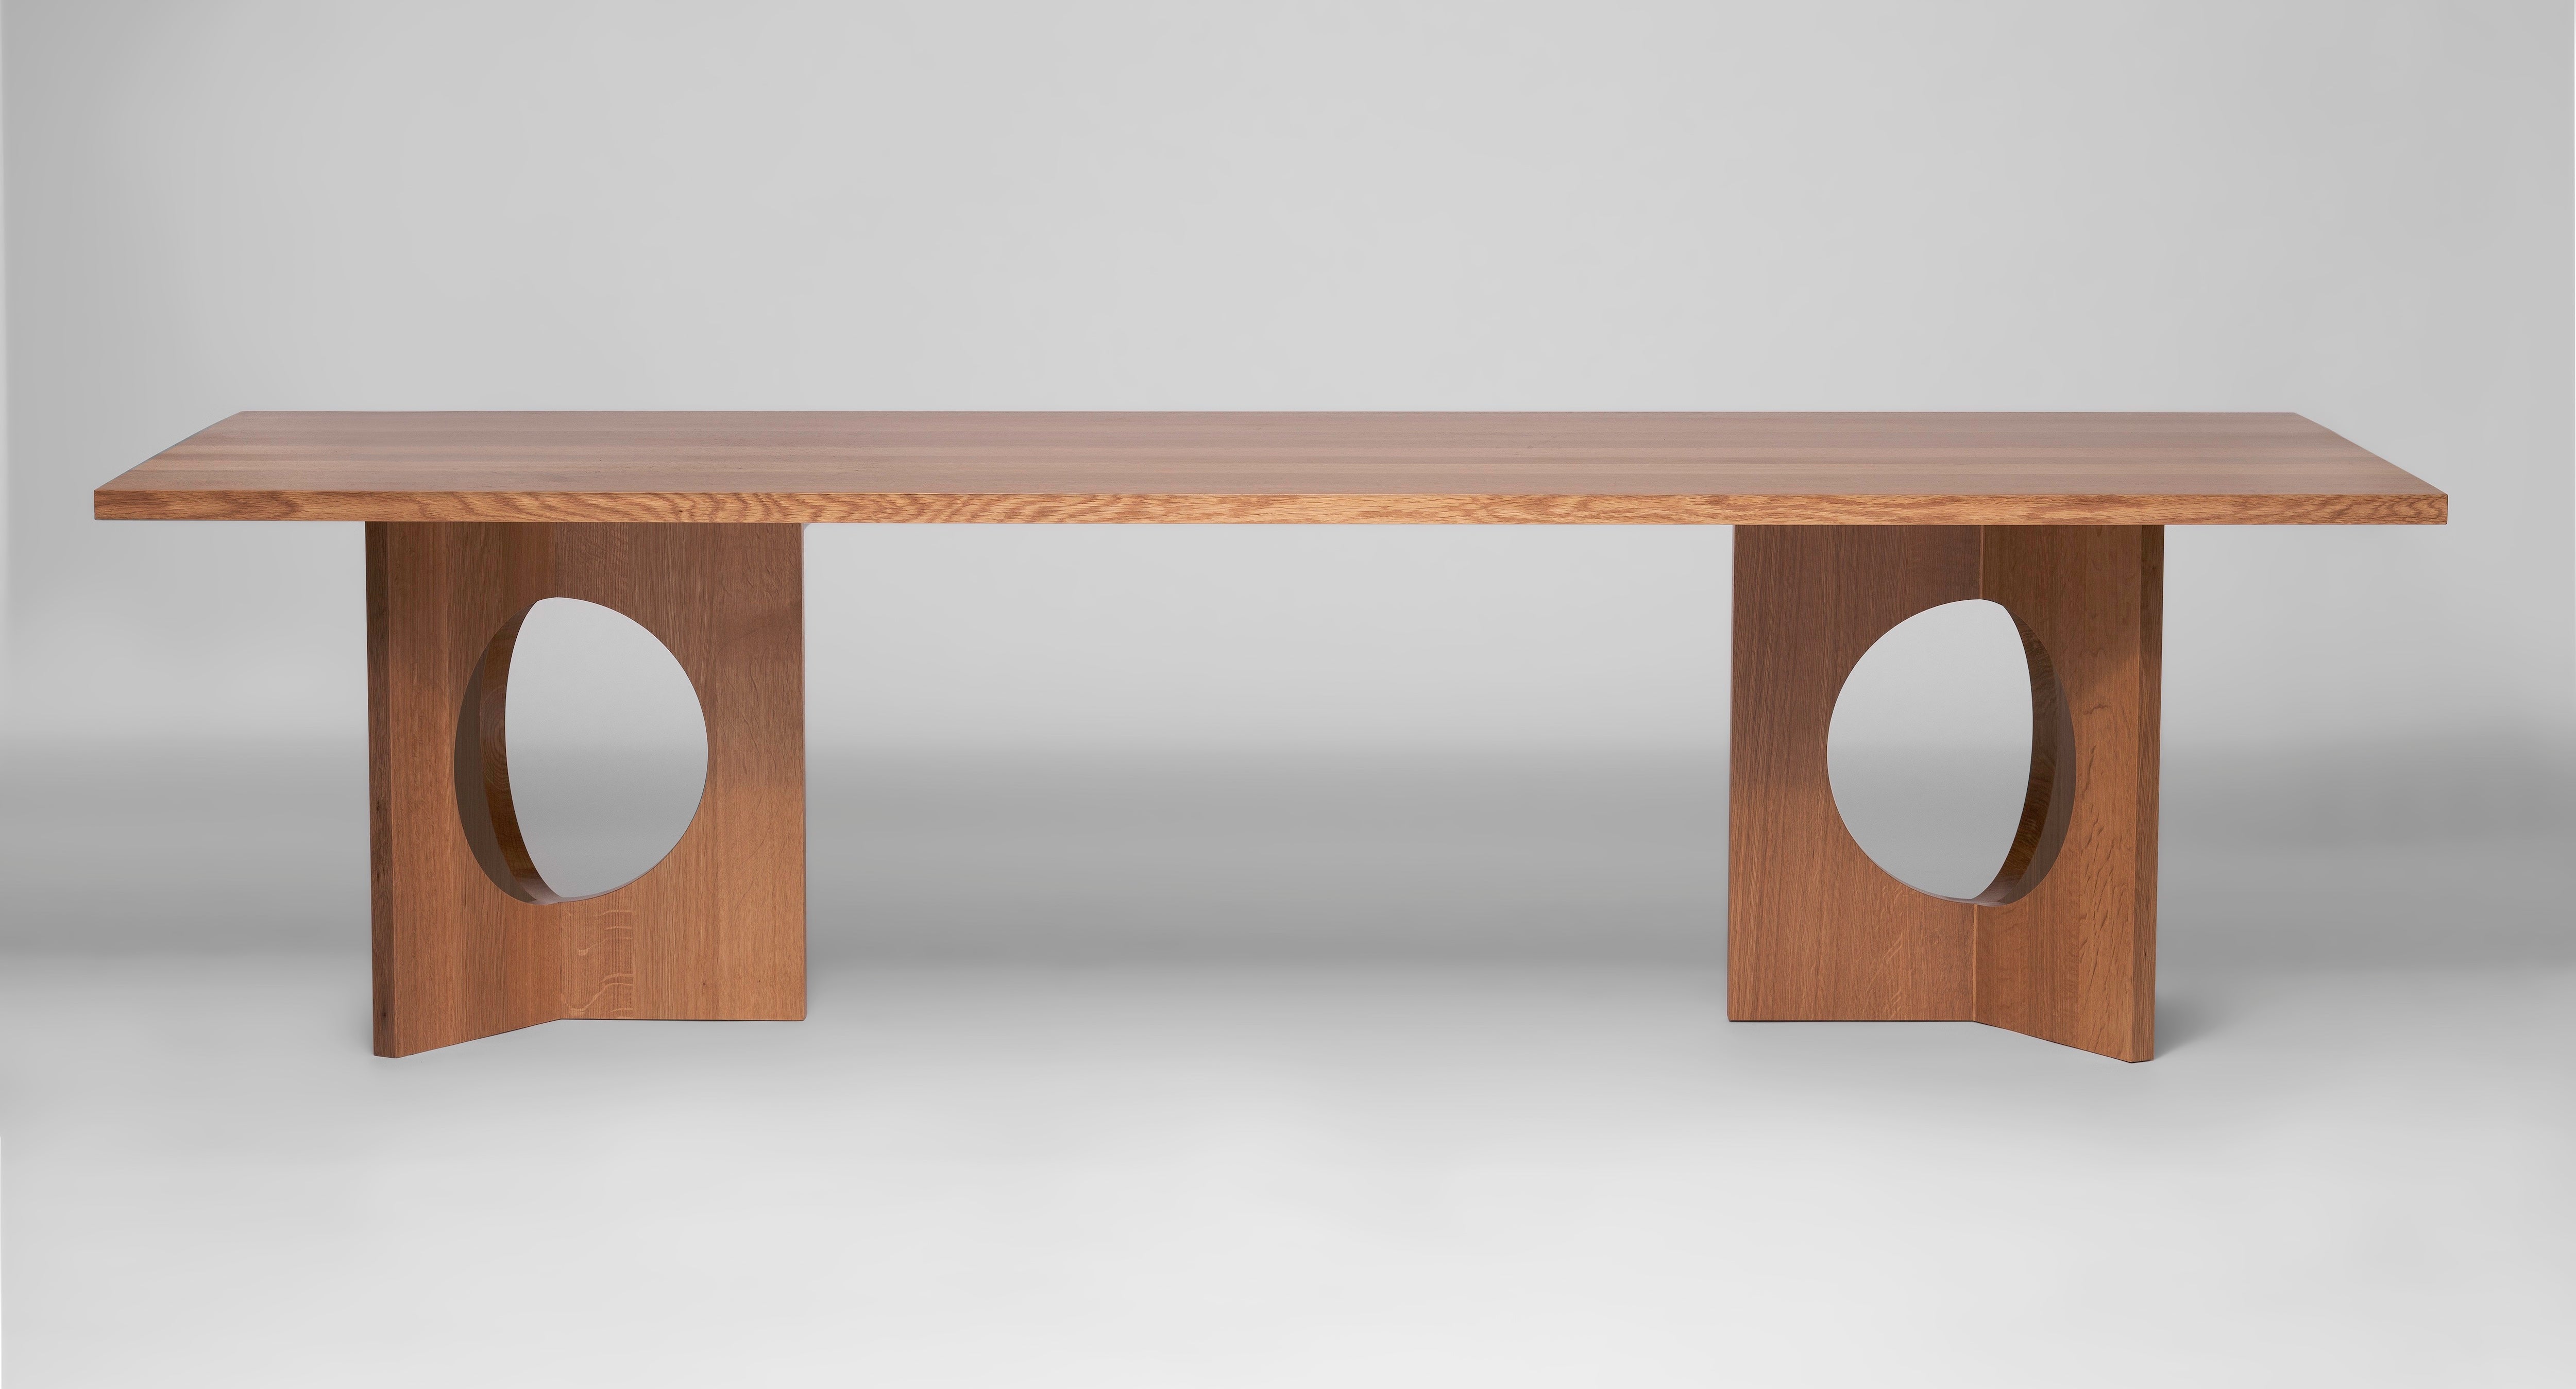 Arches Table shown in white oak with natural finish